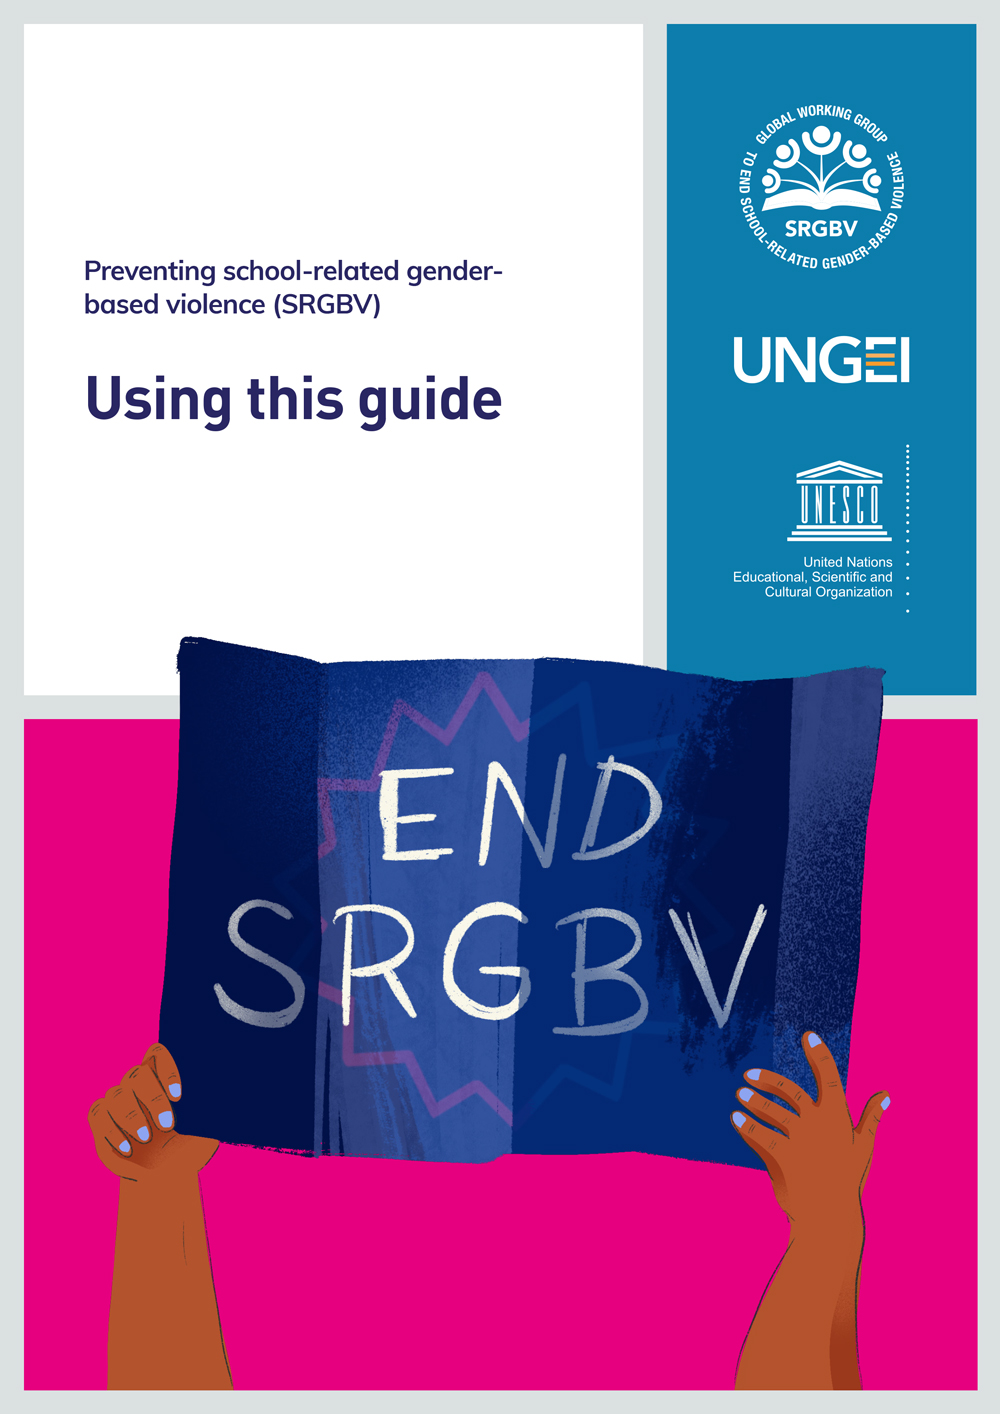 Preventing SRGBV - Using this guide